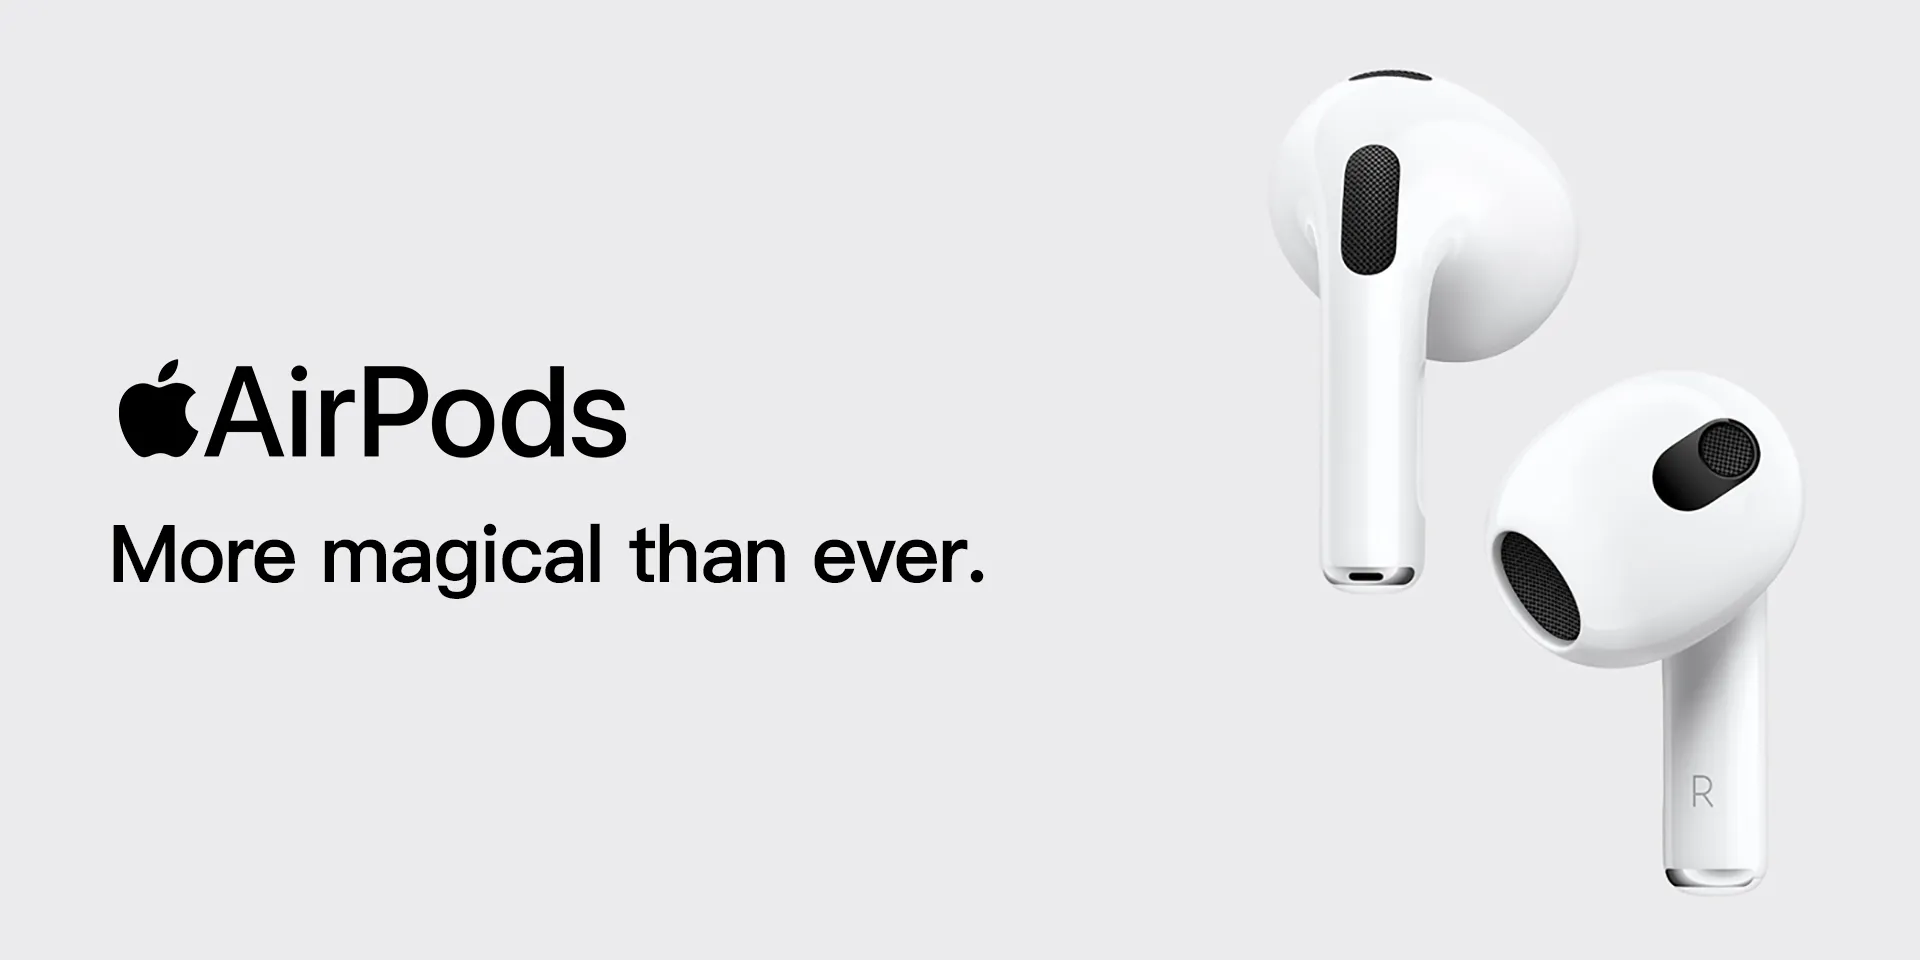 Buy airpods 3rd generation at best price in Pakistan | Rhizmall.pk